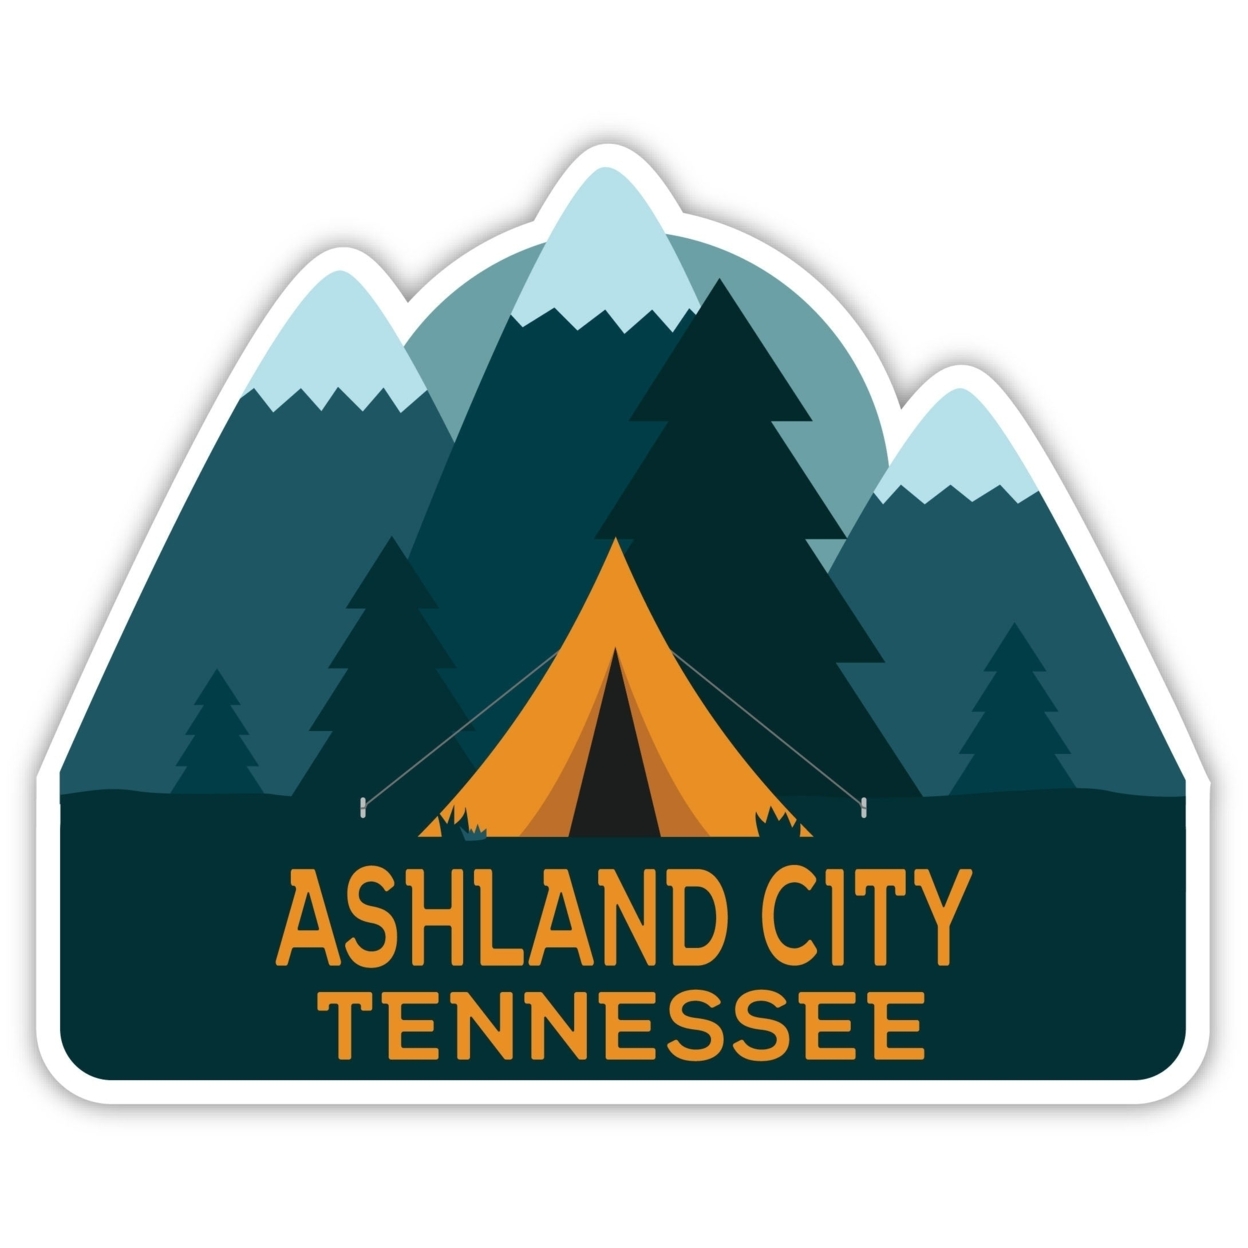 Ashland City Tennessee Souvenir Decorative Stickers (Choose Theme And Size) - 4-Pack, 12-Inch, Tent